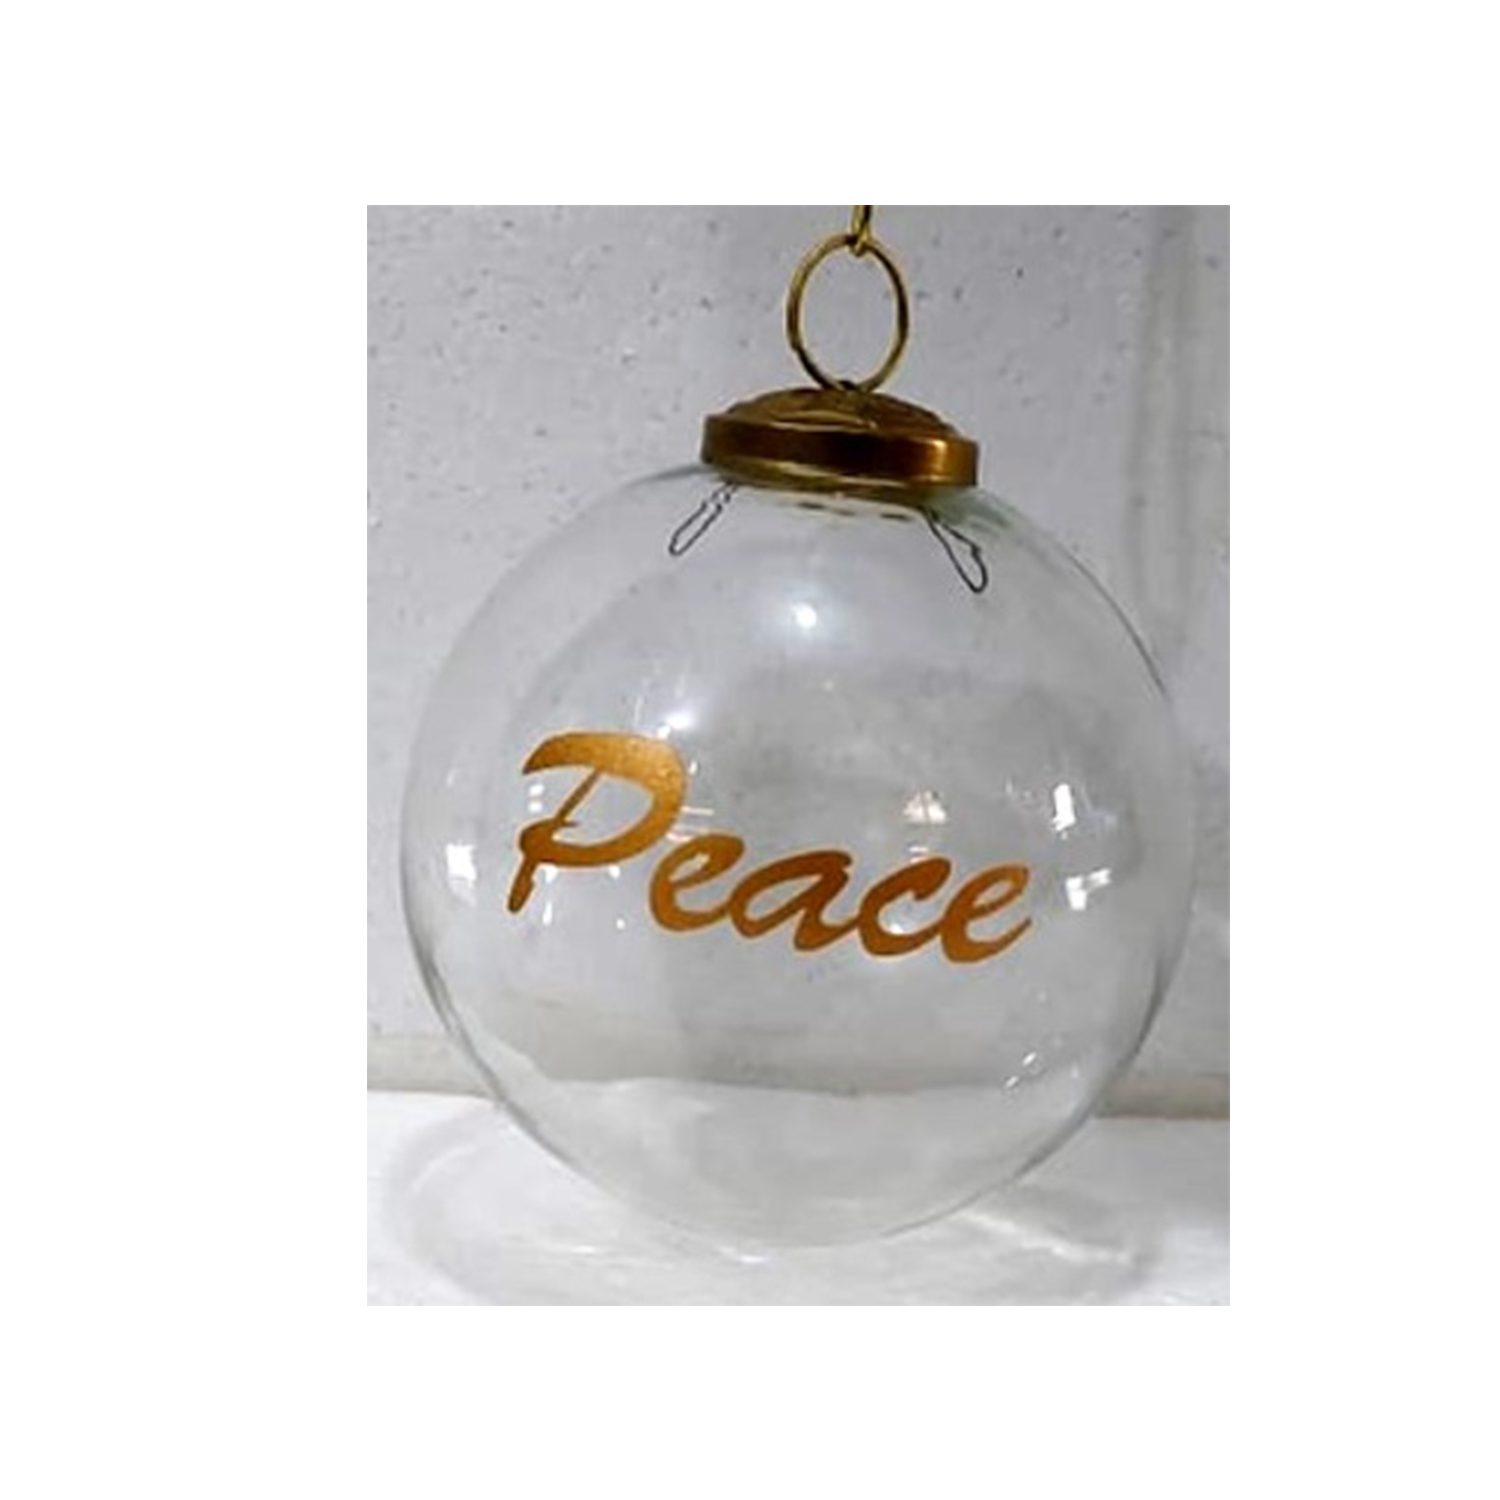 Floydd Glass Ornament, Transparent with Gold